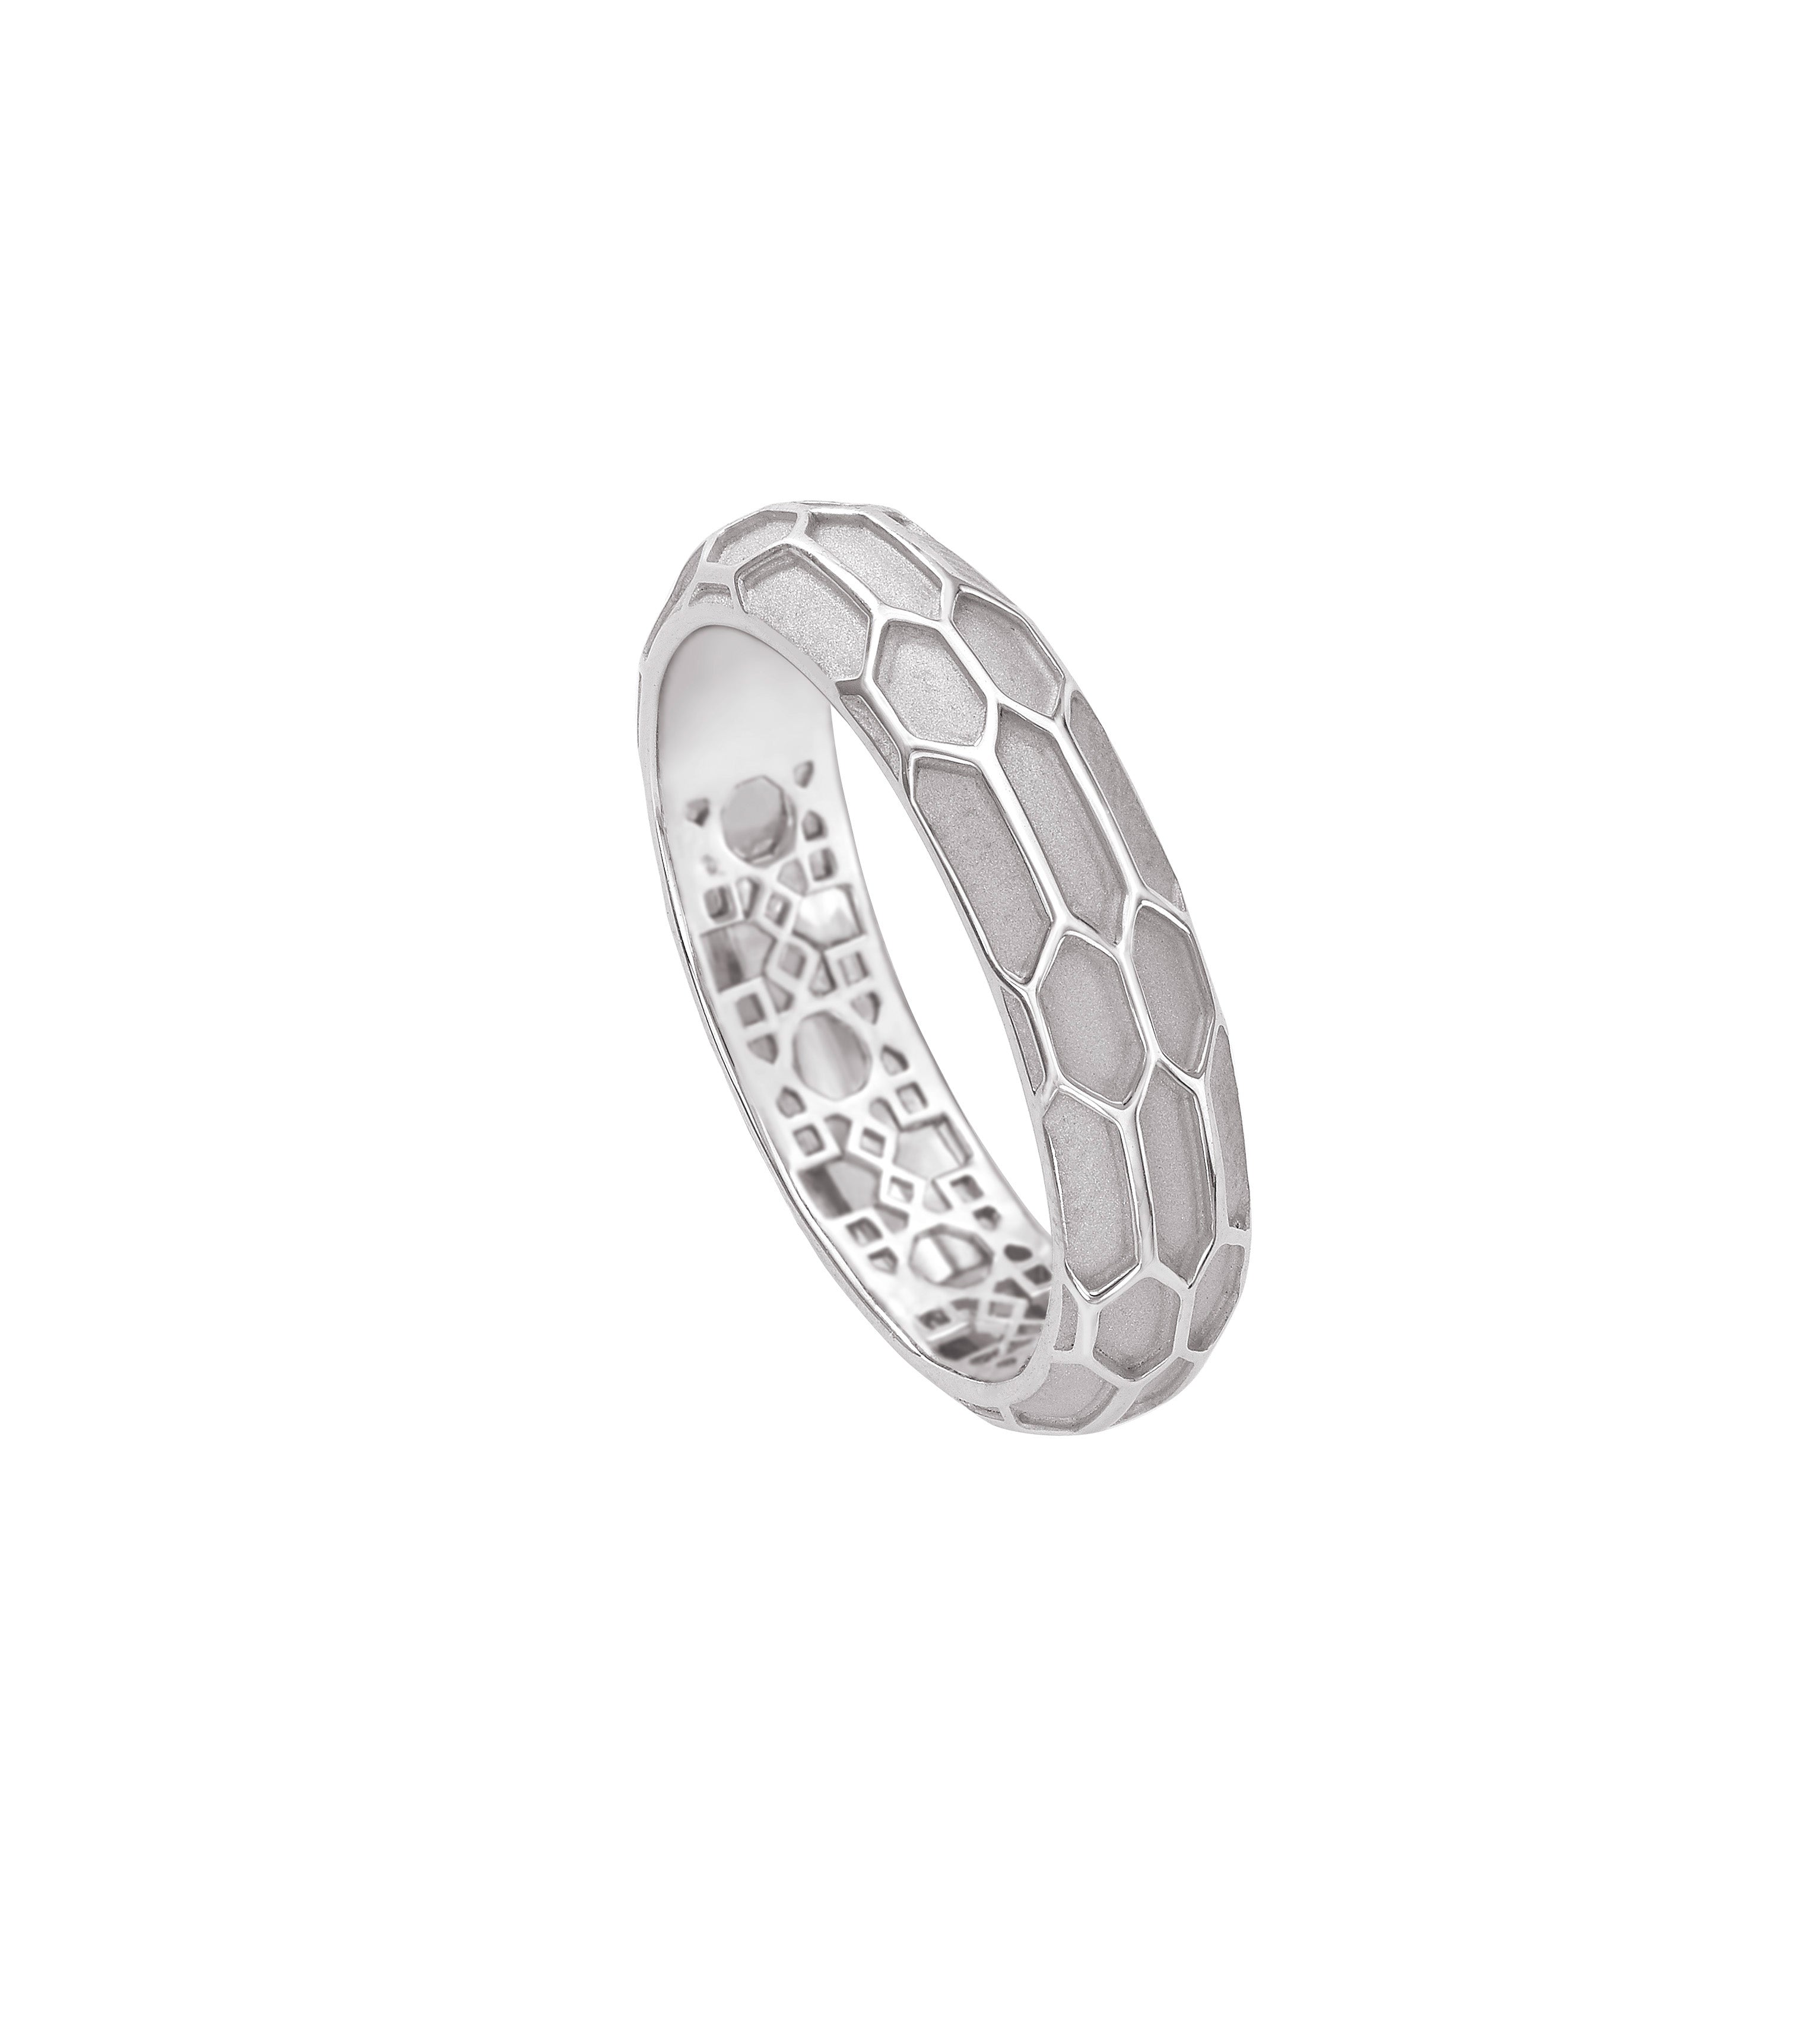 The Ophidian Scales Ring - White Gold